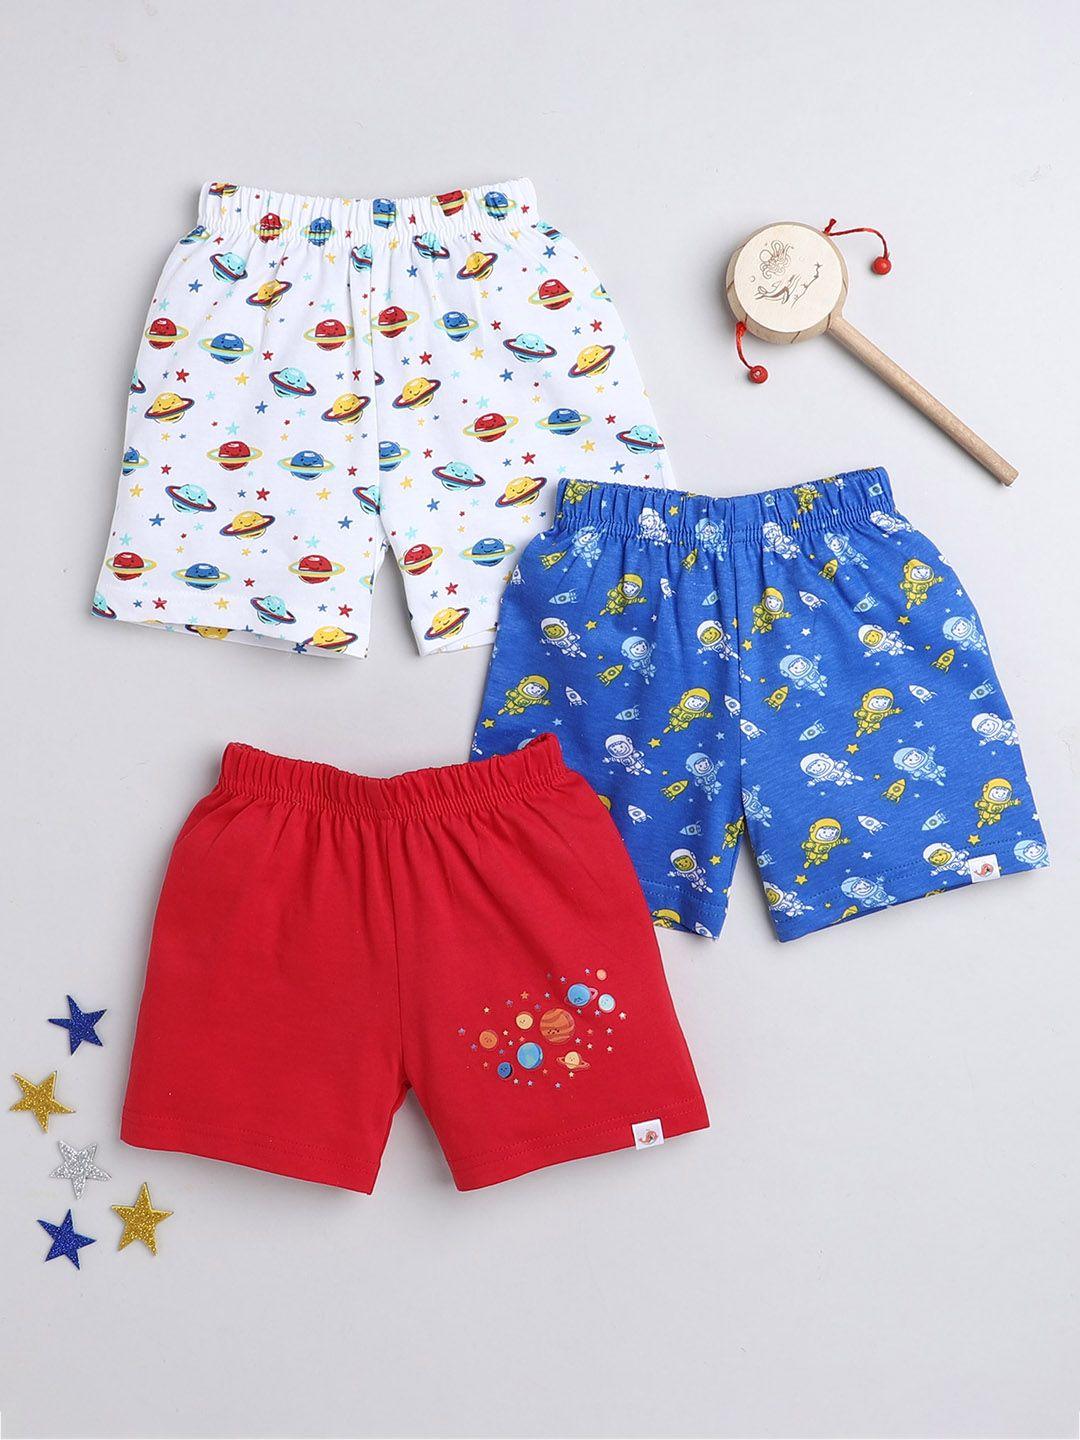 bumzee-boys-pack-of-3-graphic-printed-cotton-shorts